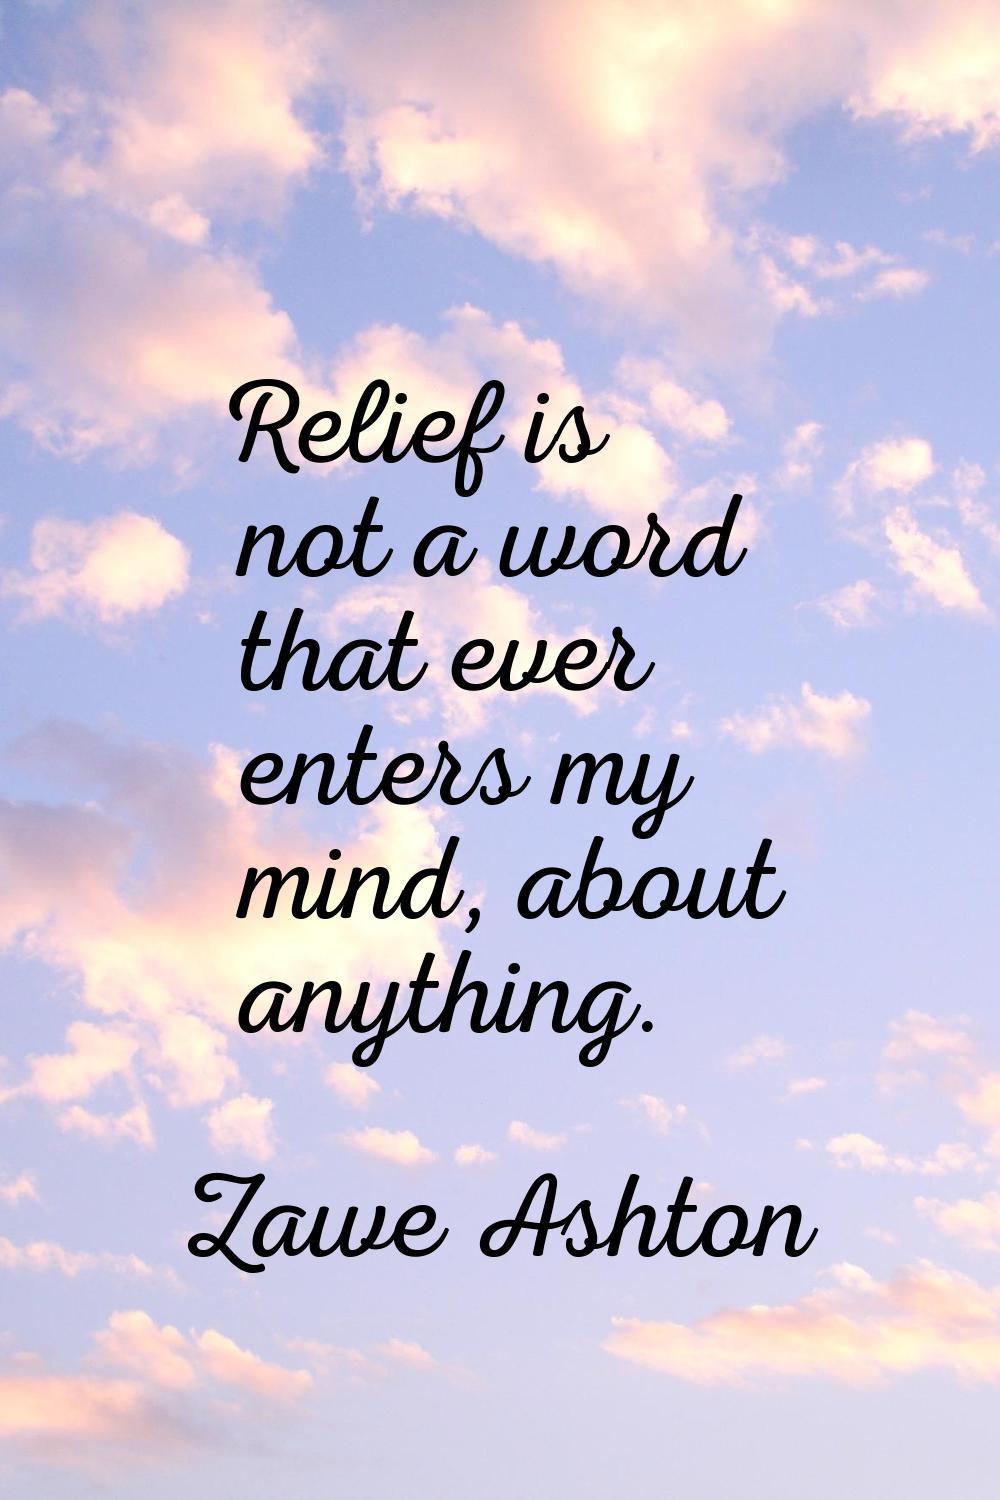 Relief is not a word that ever enters my mind, about anything.